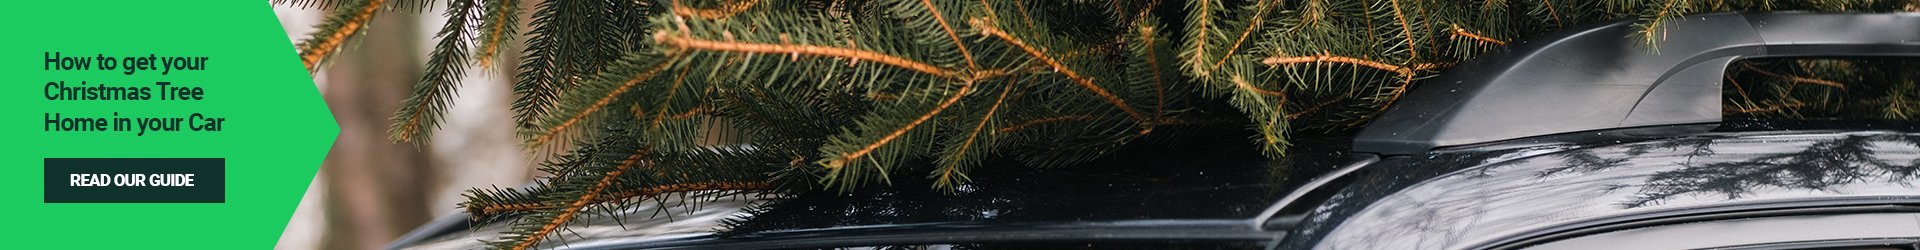 How to get your Christmas Tree Home in your Car